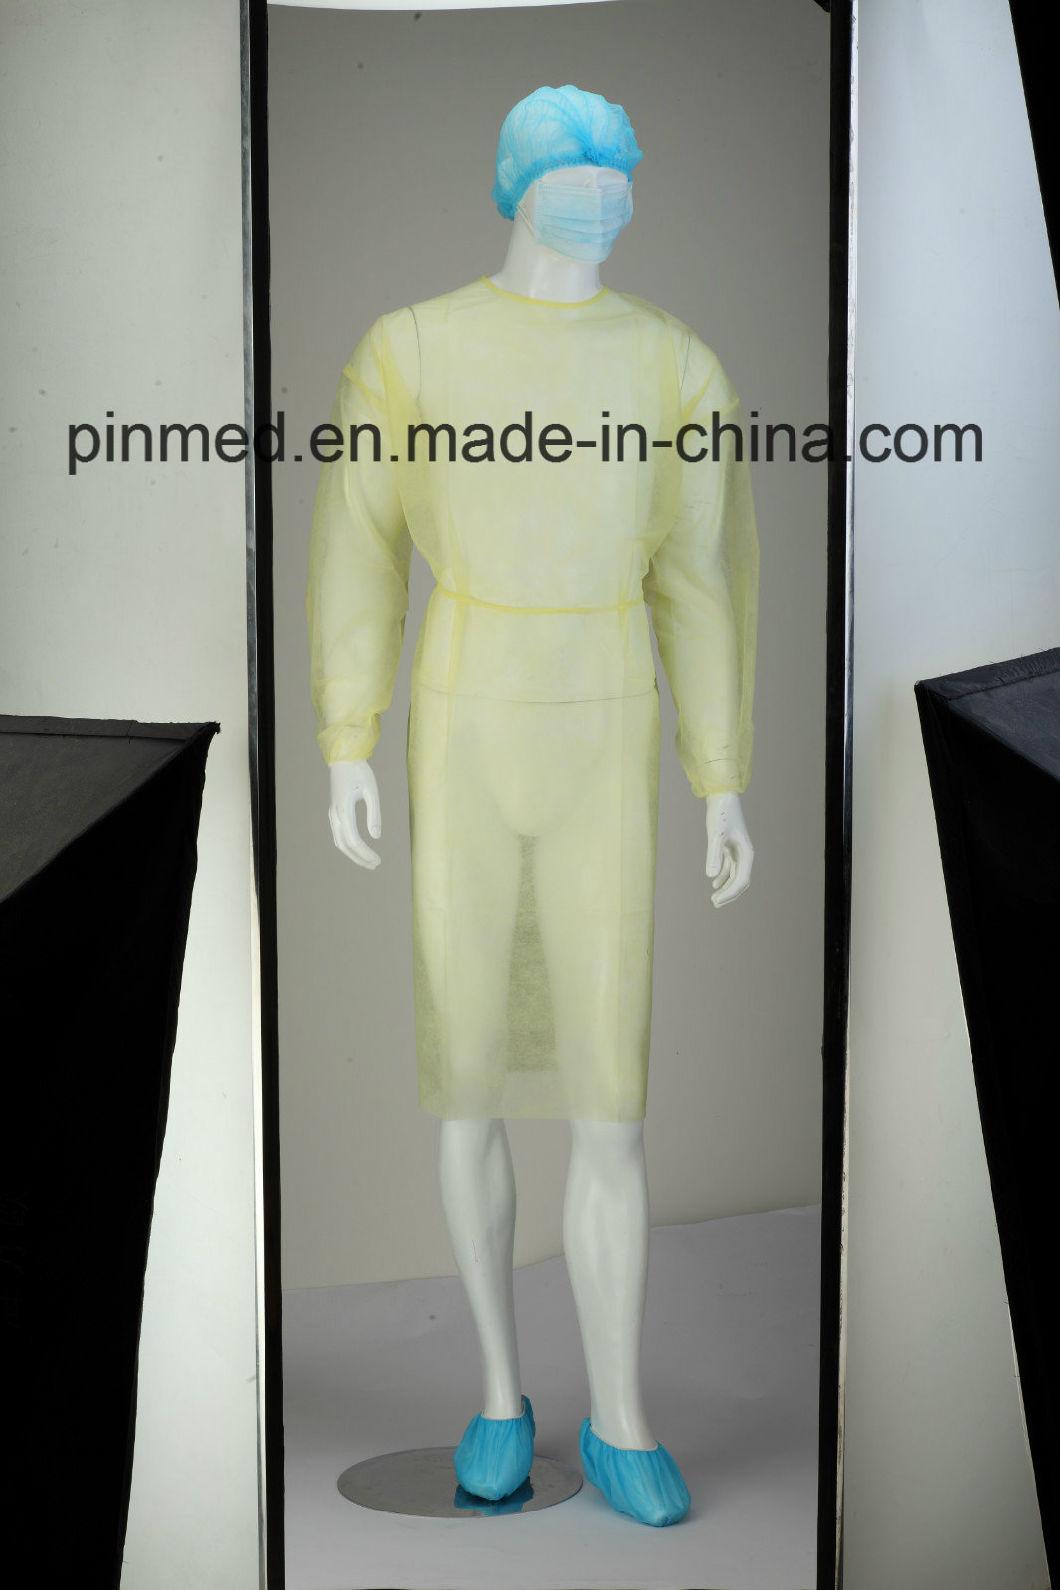 Pinmed Disposable PP Isolation Gown